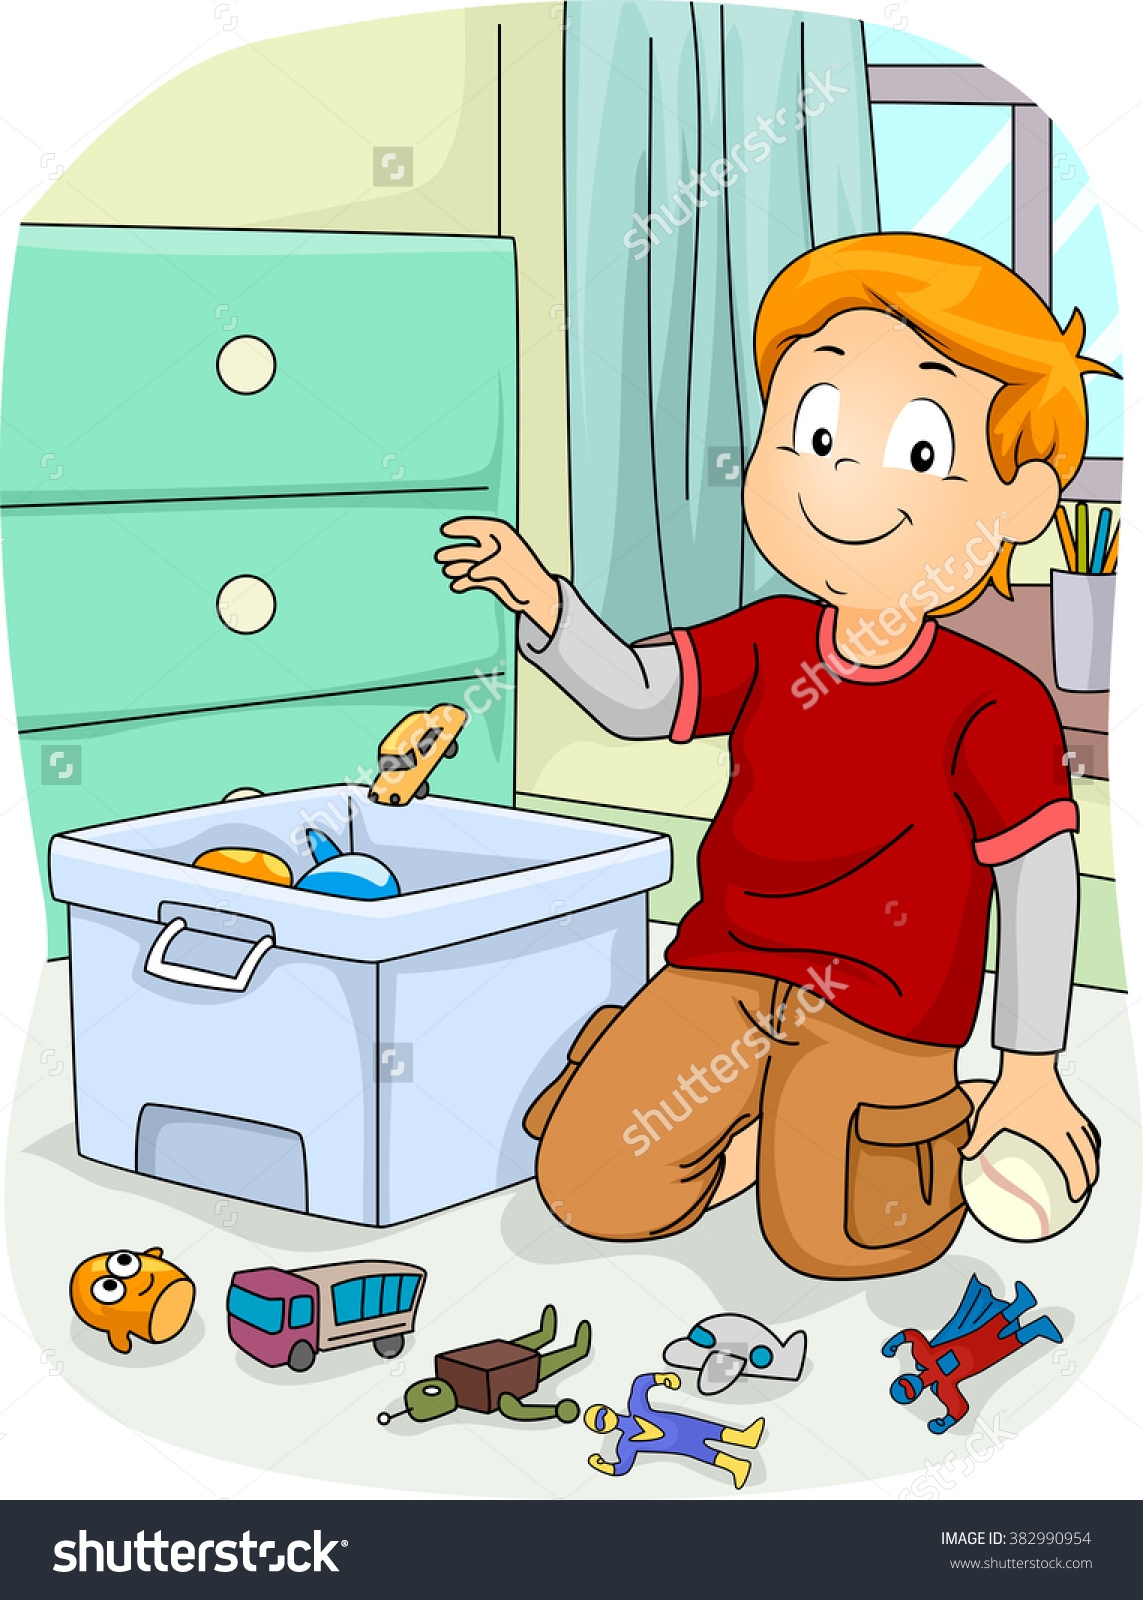 Clean up toys clipart Best of boy picking up toys clipart